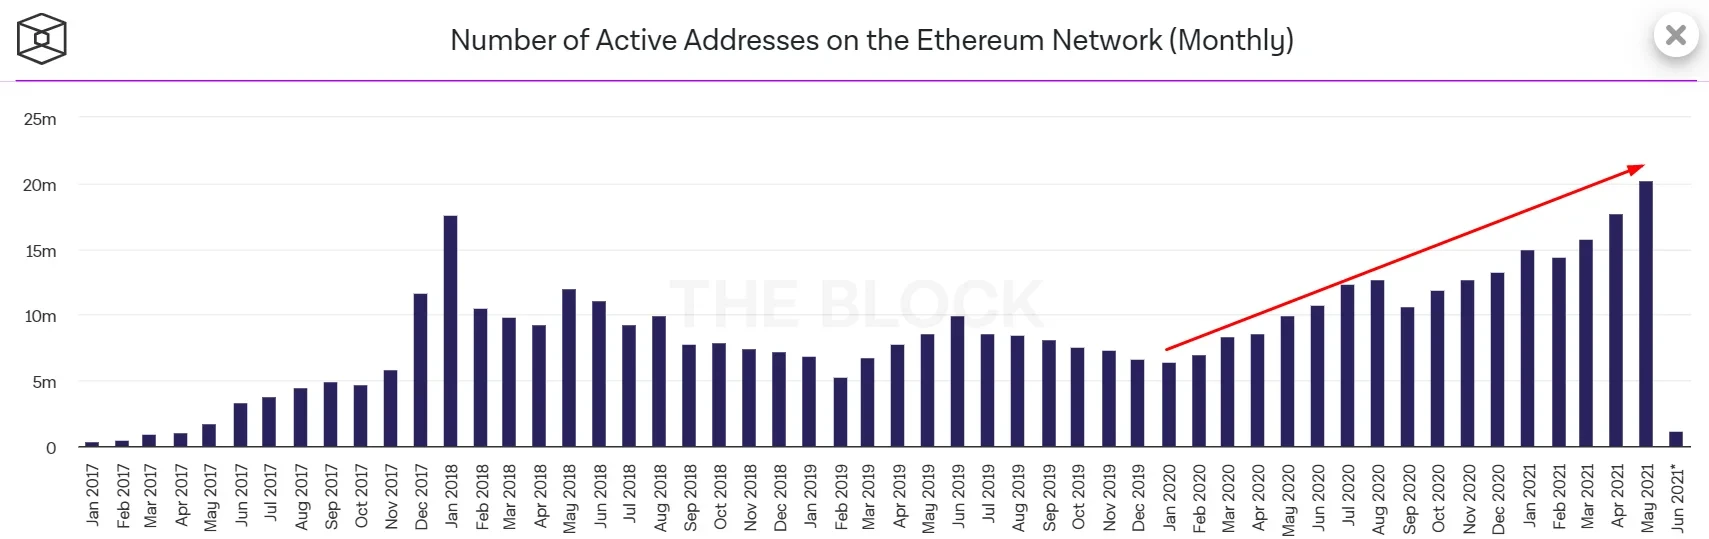 Number of Active Addresses on the Ethereum Network (Monthly)